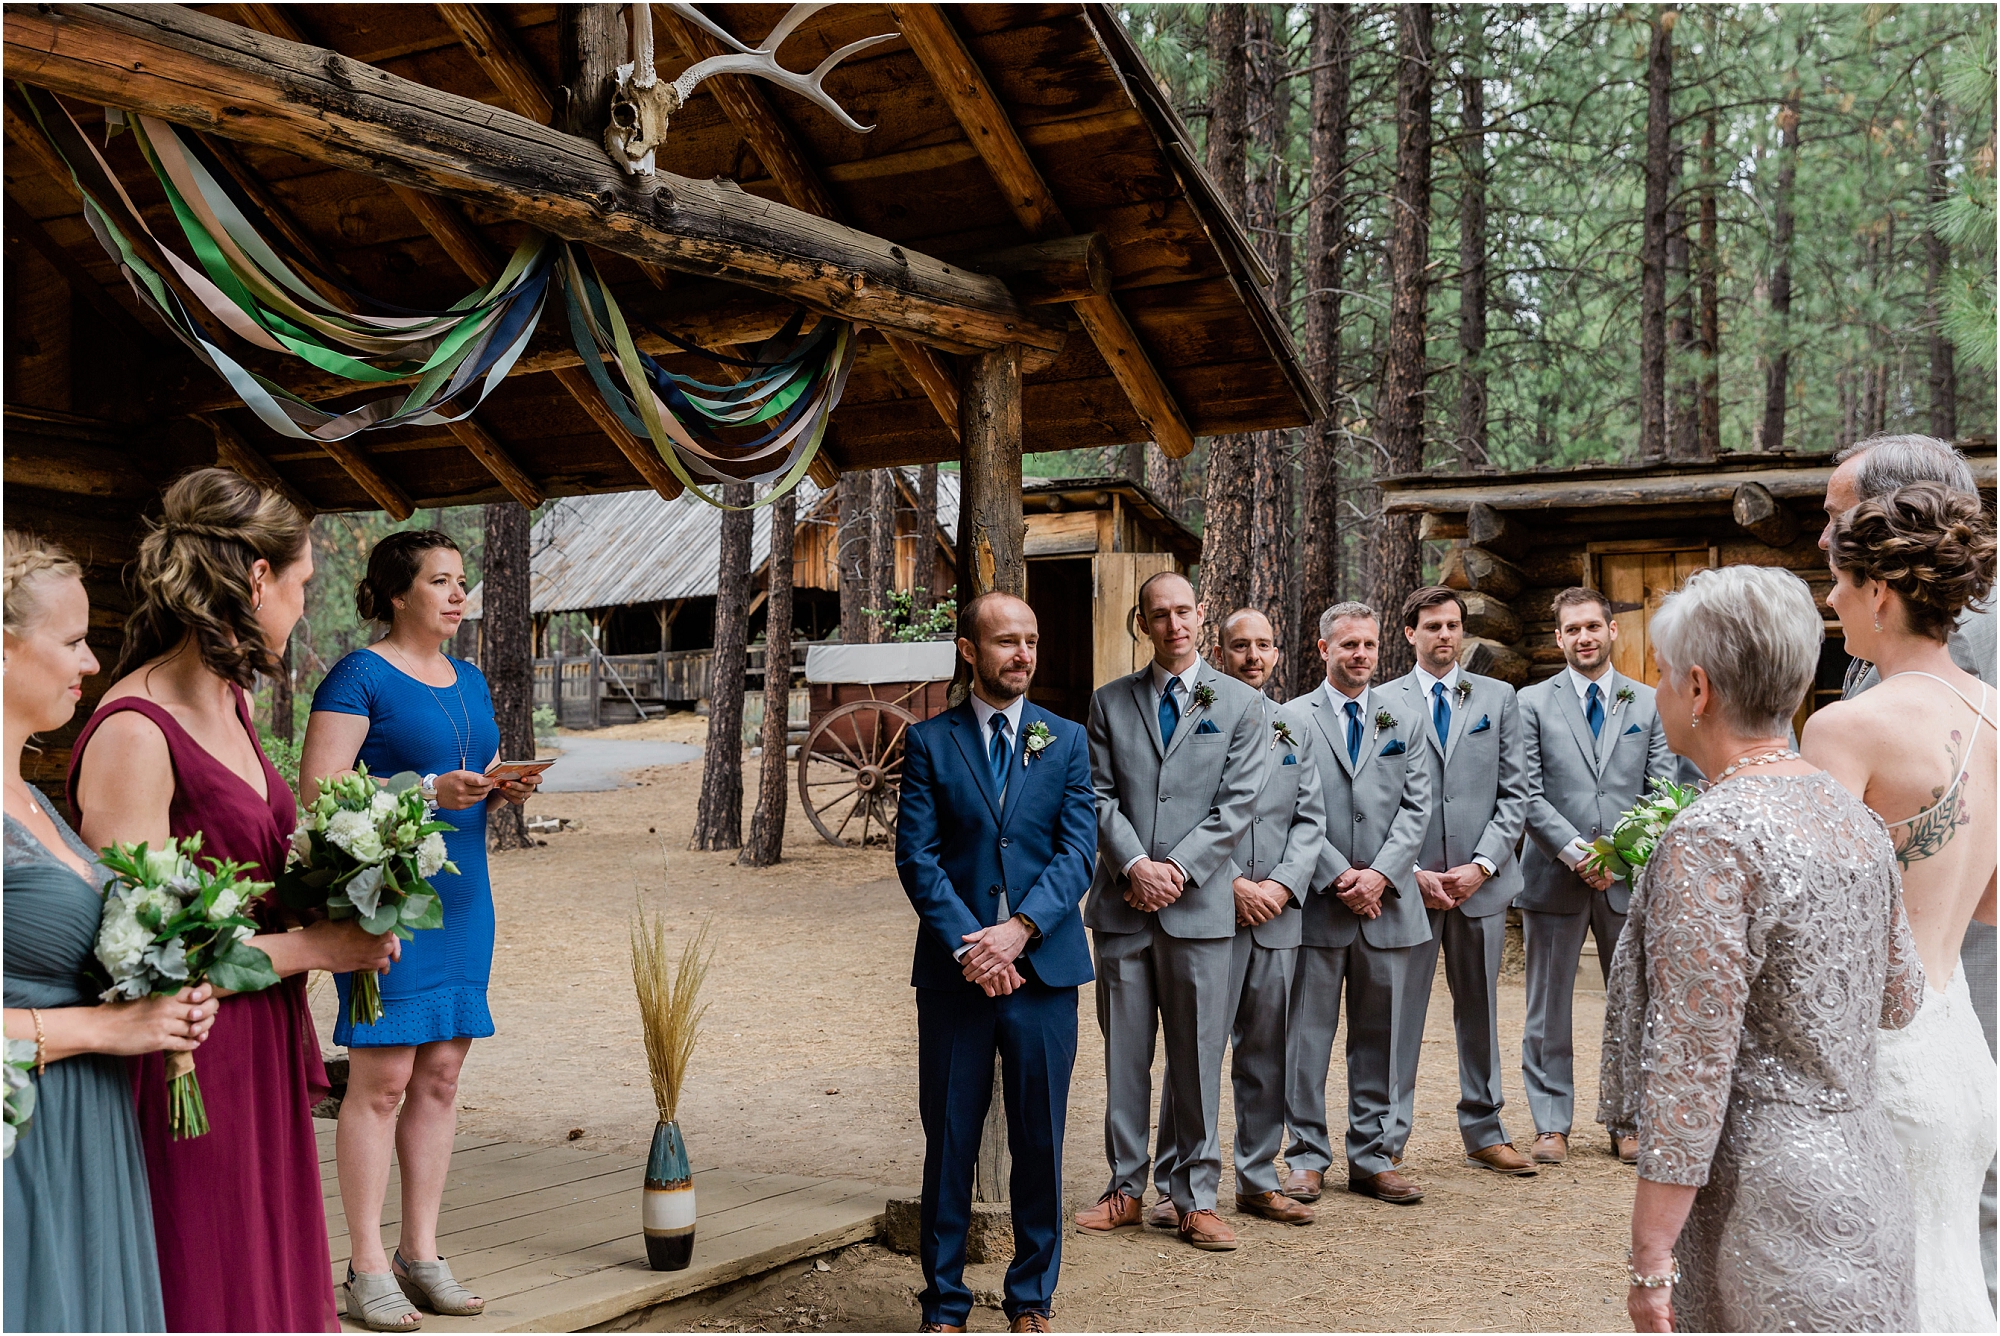 The groom waits as his bride is handed off by her parents in front of their friends at family at their Bend, Oregon wedding in the spring. | Erica Swantek Photography